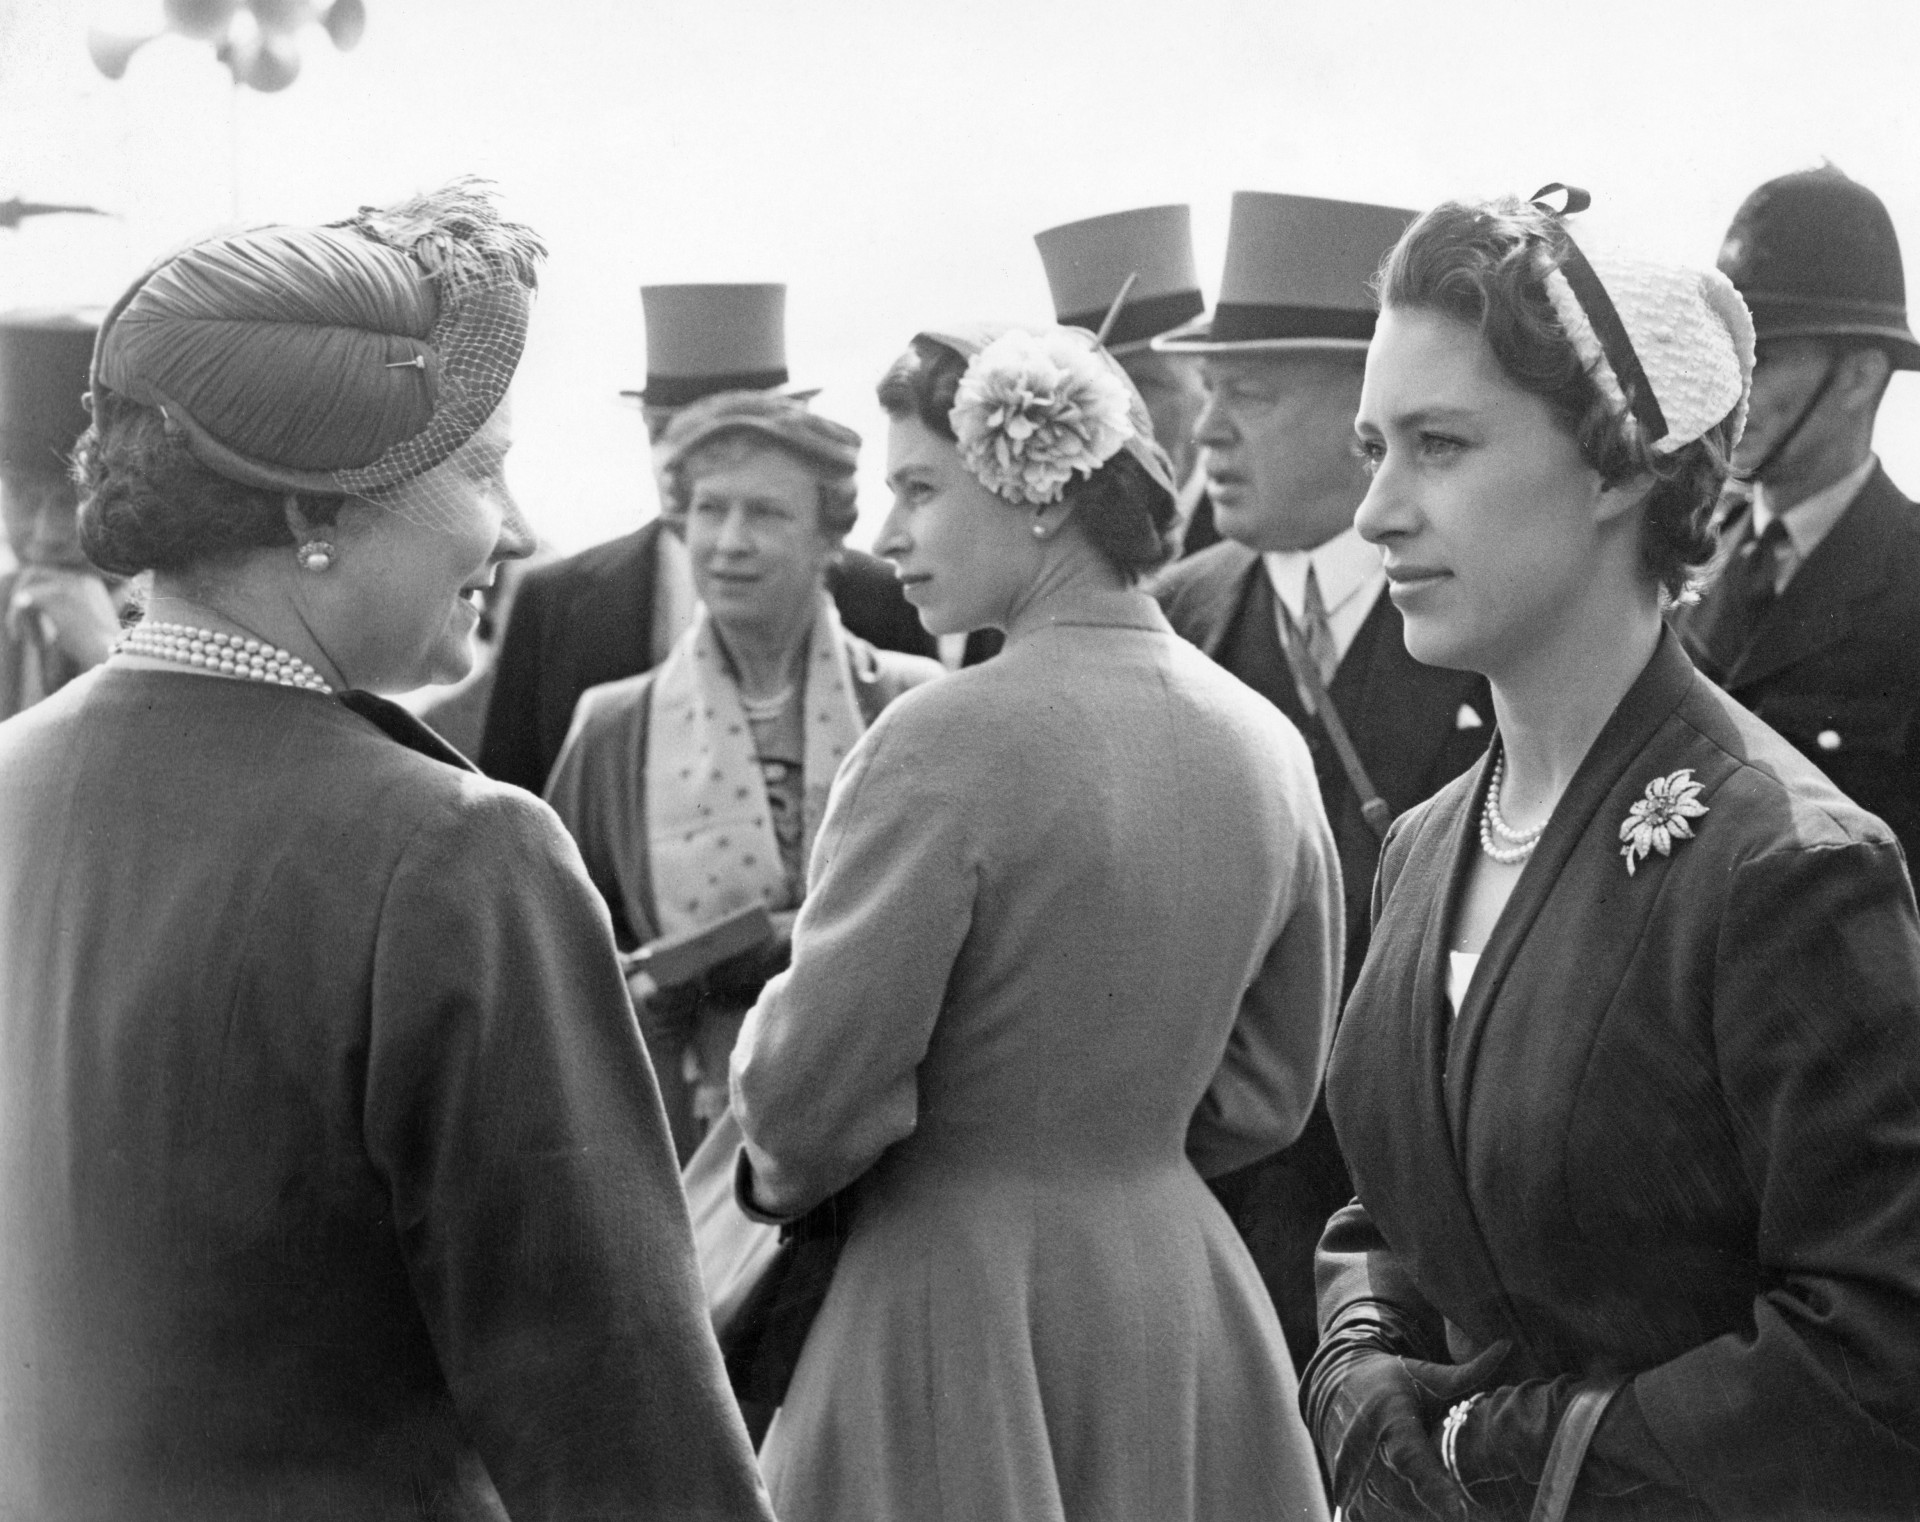 Queen Elizabeth and Princess Margaret enjoy horse racing at the Epsom Derby.<p><a href="https://www.msn.com/en-au/community/channel/vid-7xx8mnucu55yw63we9va2gwr7uihbxwc68fxqp25x6tg4ftibpra?cvid=94631541bc0f4f89bfd59158d696ad7e">Follow us and access great exclusive content every day</a></p>